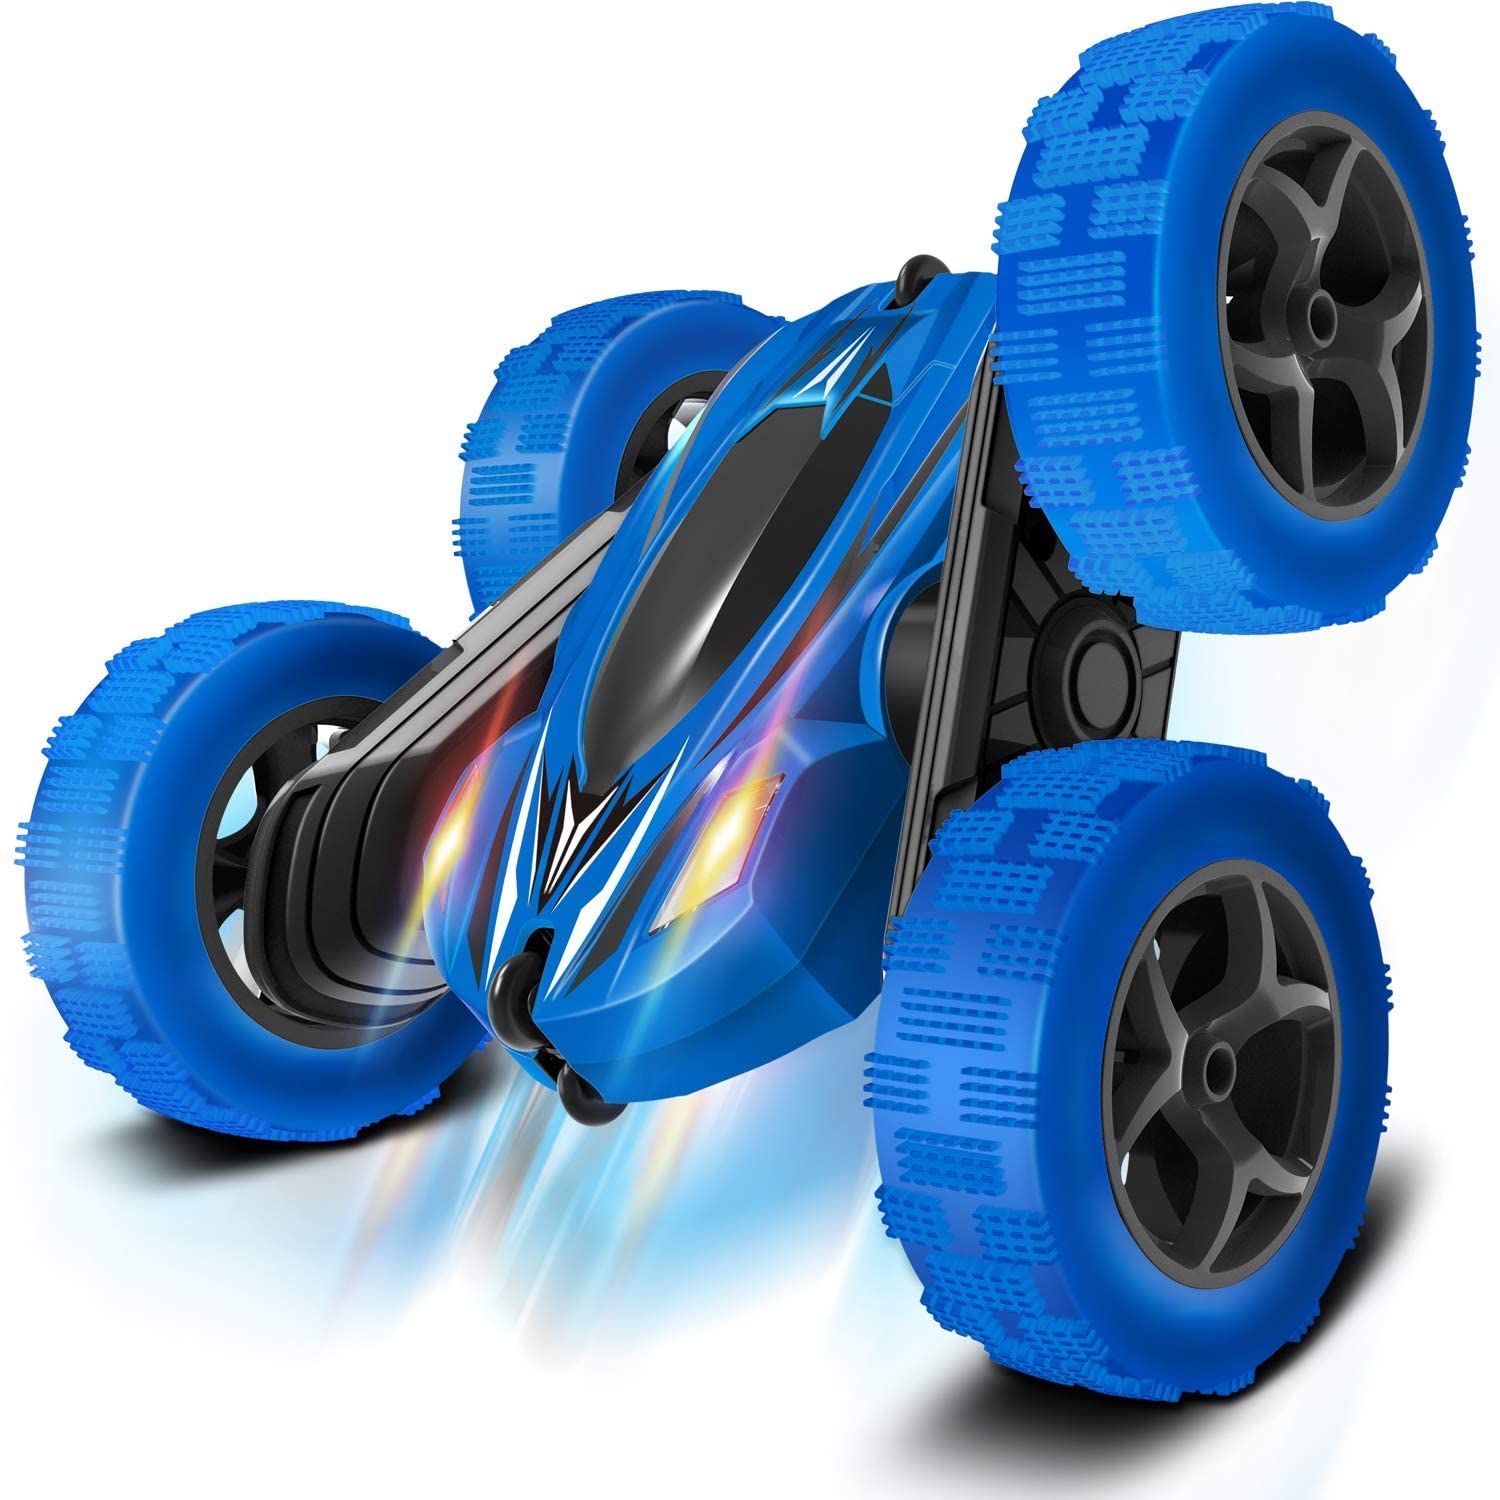 EUTOYZ Gifts for 2-6 Year Old Boys Girls,Toy Cars for 2-6 Year Old Boys Girls 